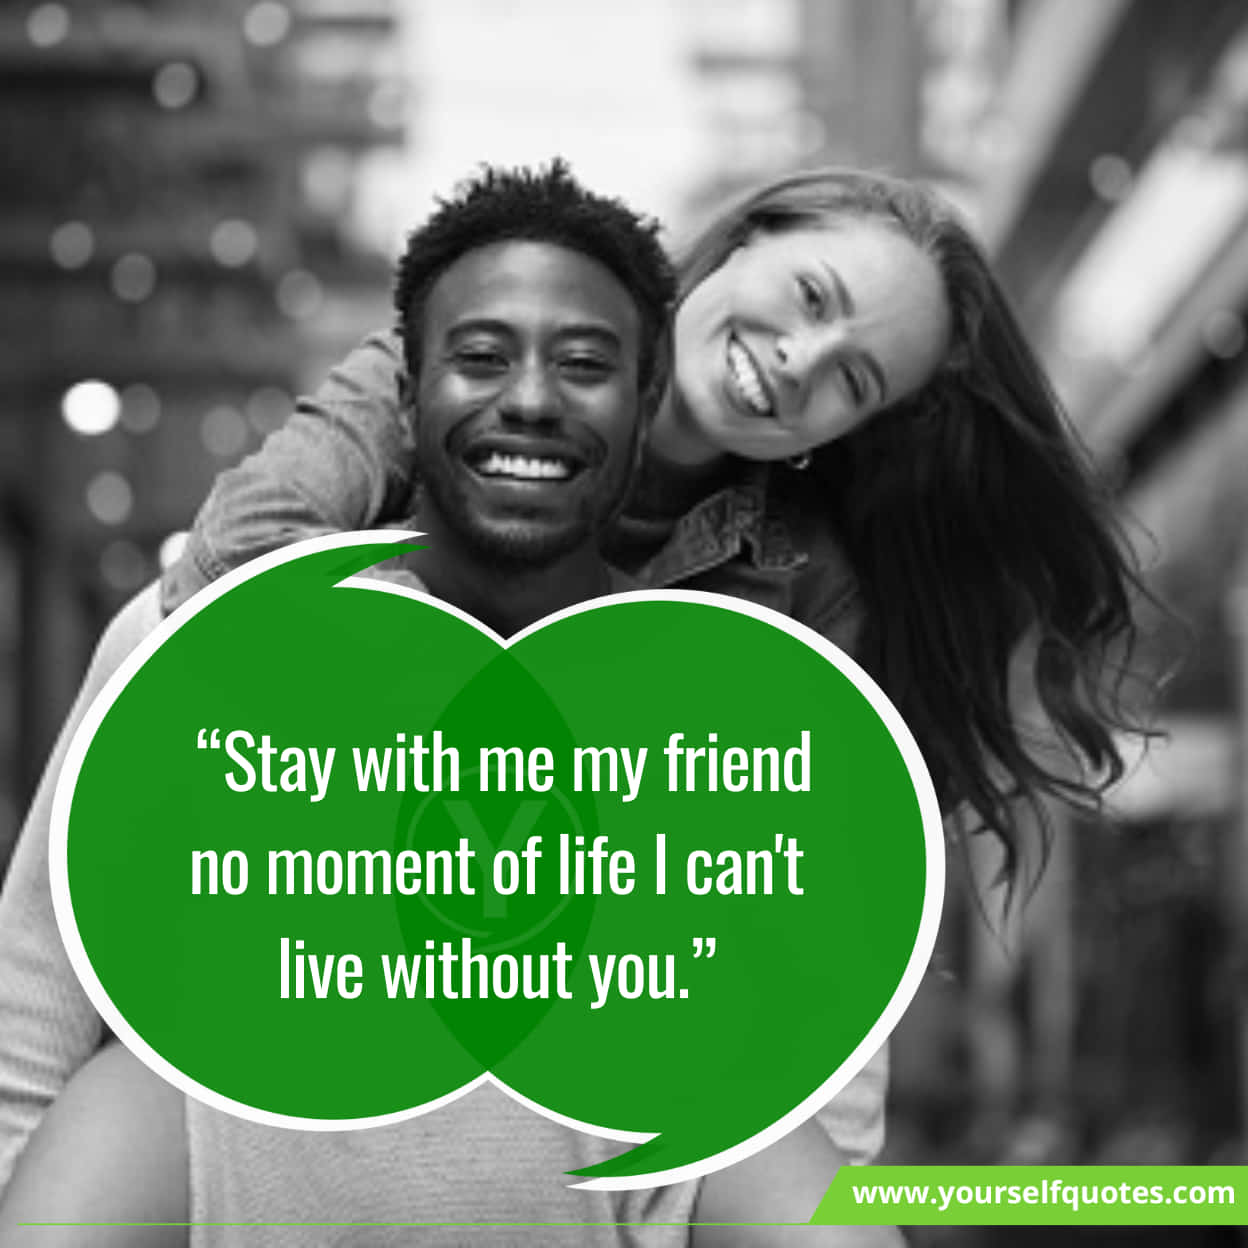 Lovely Love Messages For Couples